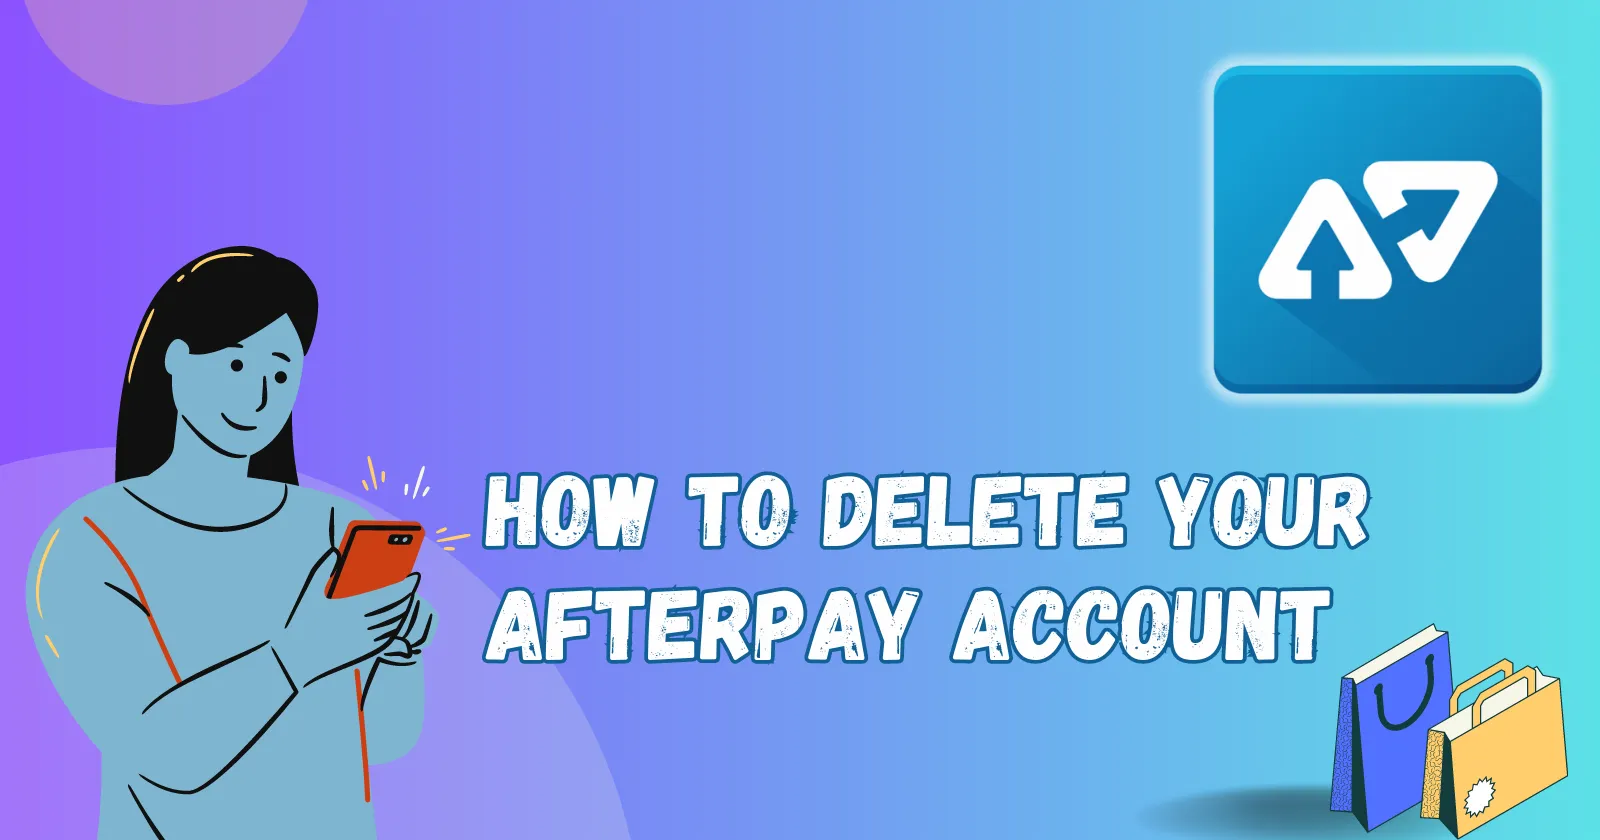 How to Delete Your Afterpay Account